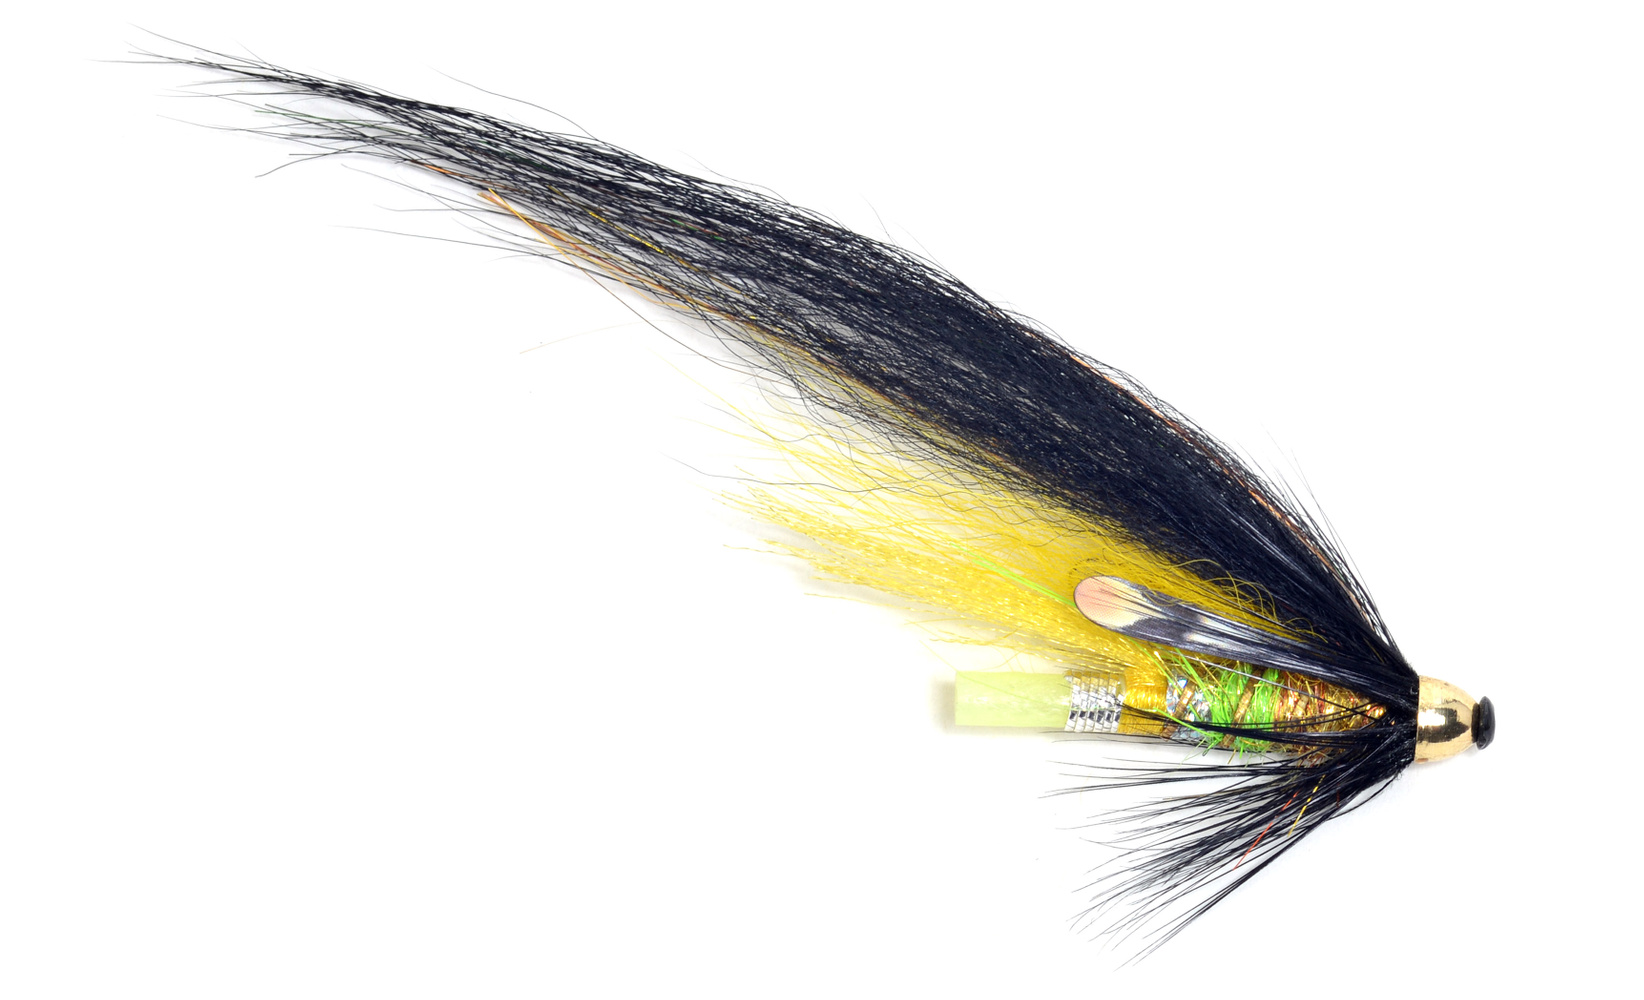 Salmon Flies - Flies for salmon and sea trout fishing